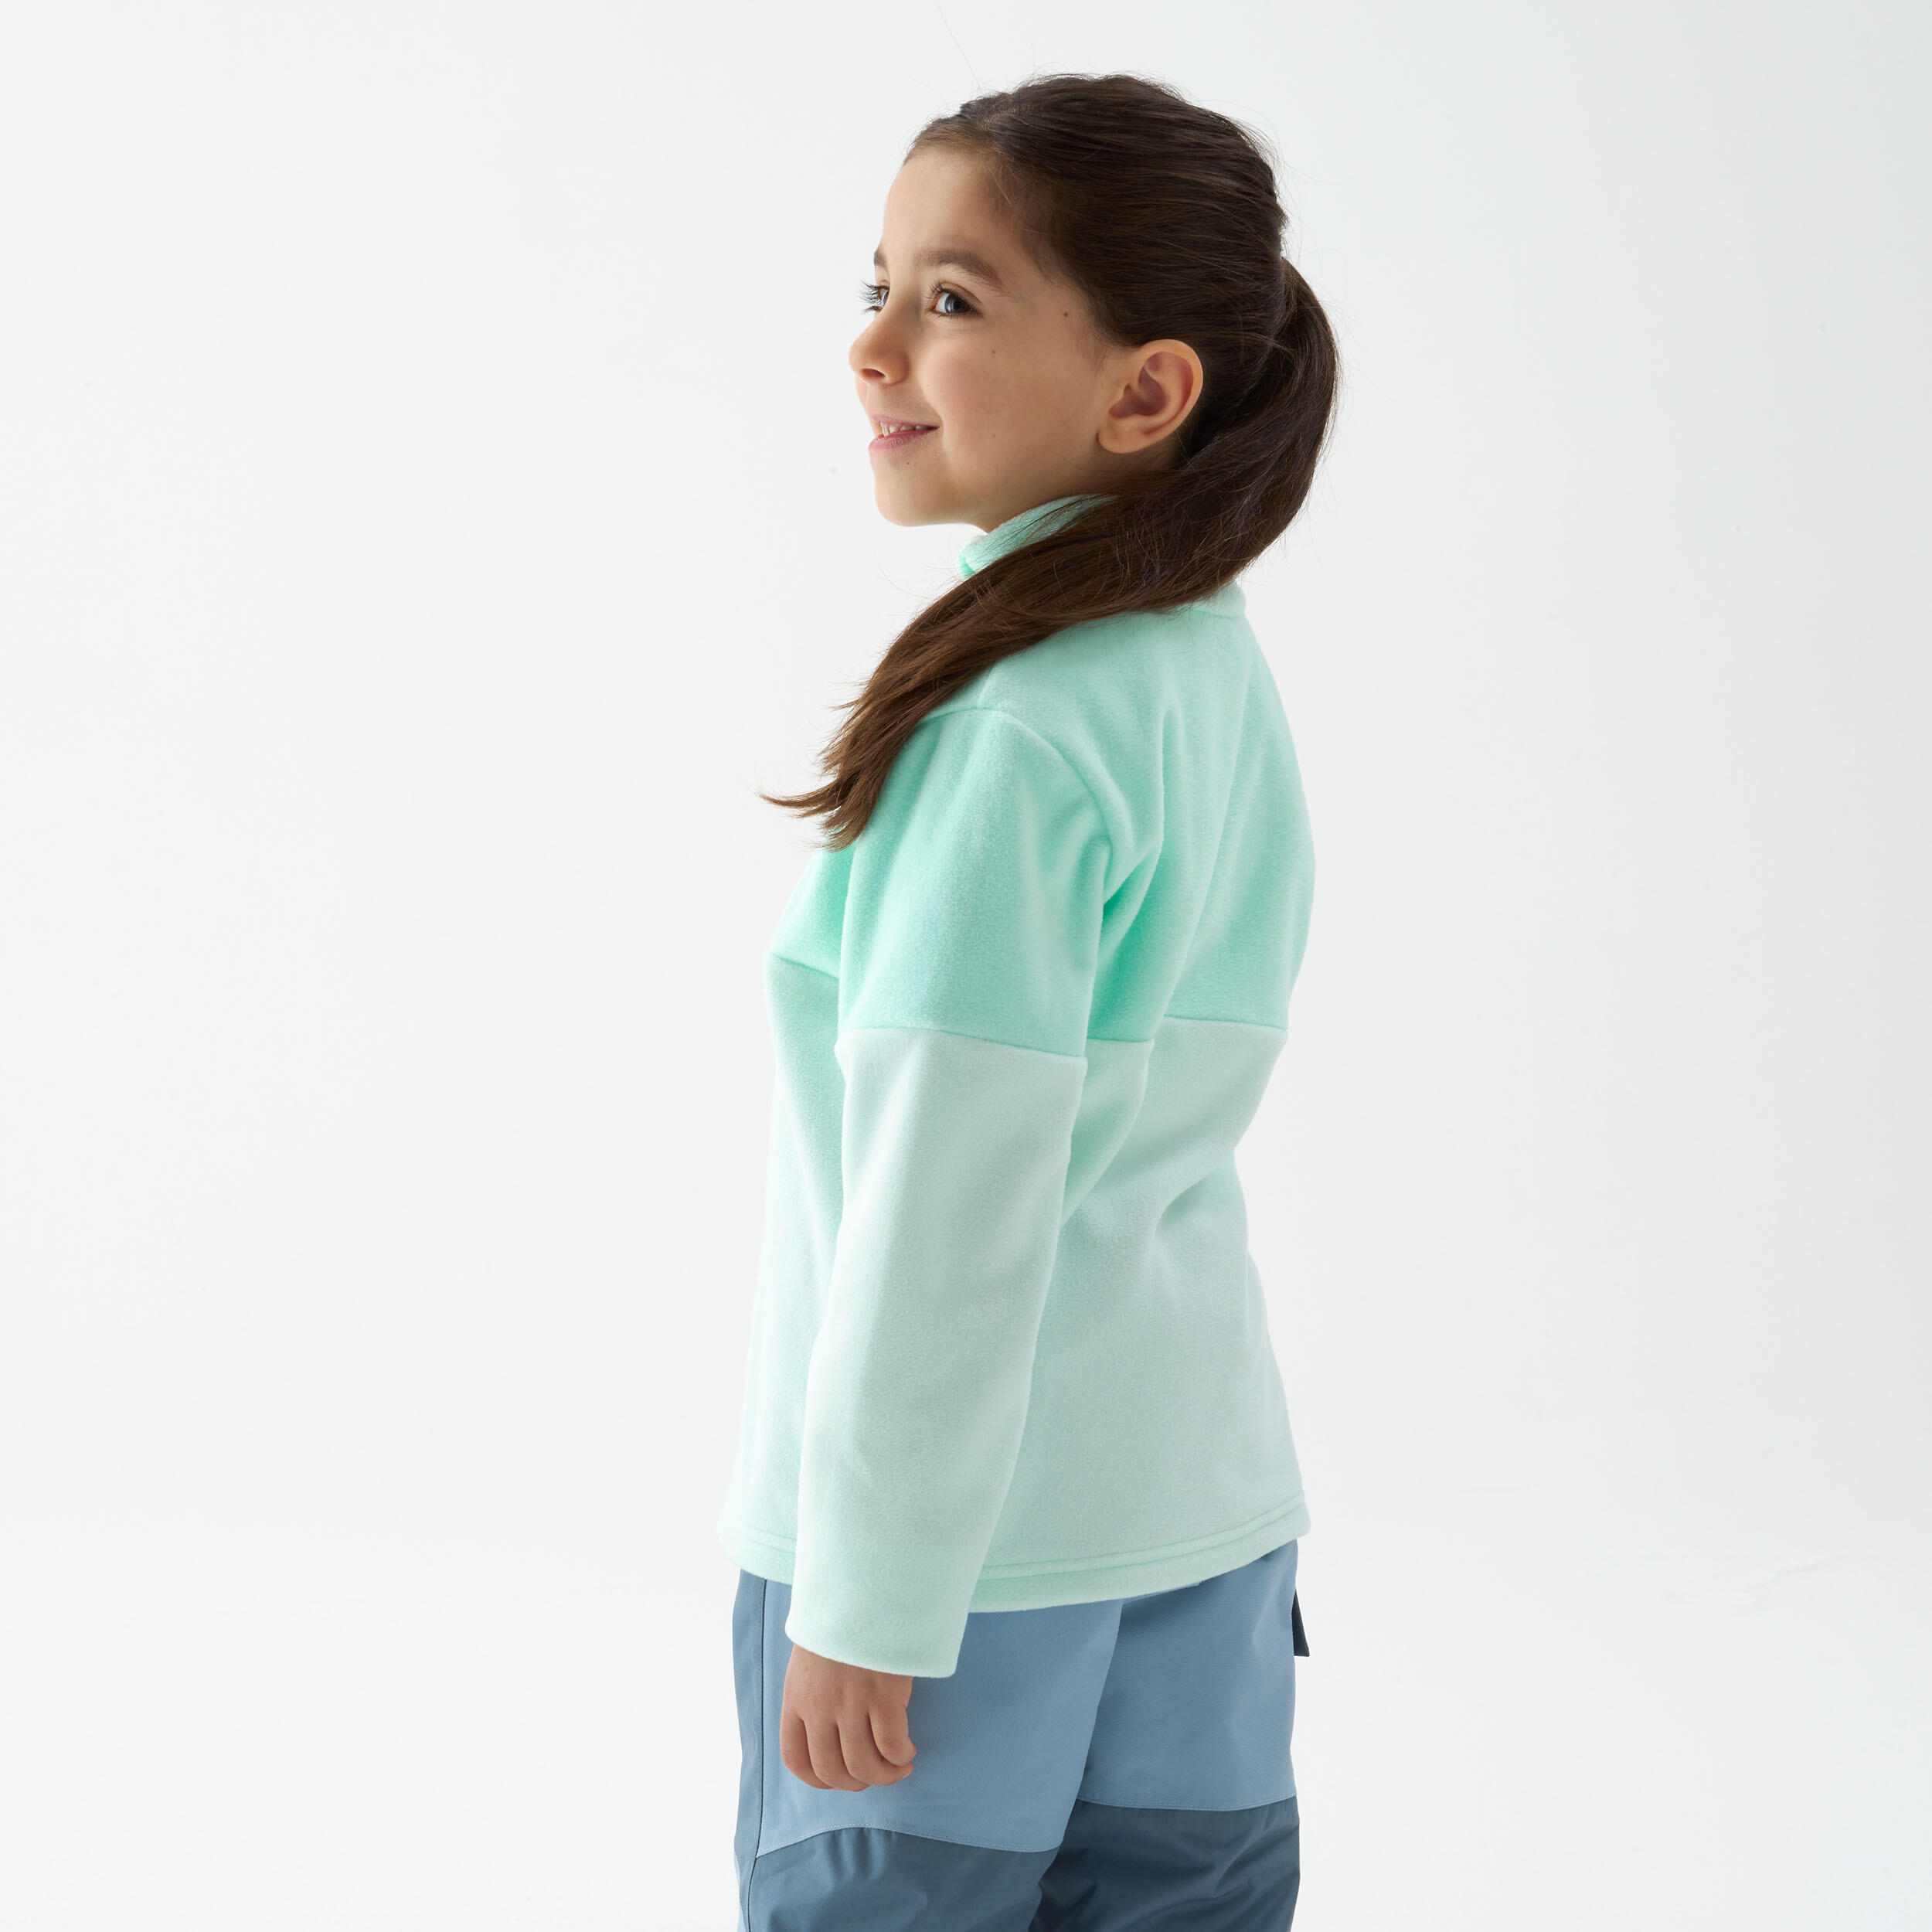 Kids’ Hiking Fleece - MH120 turquoise - ages 2–6  5/6